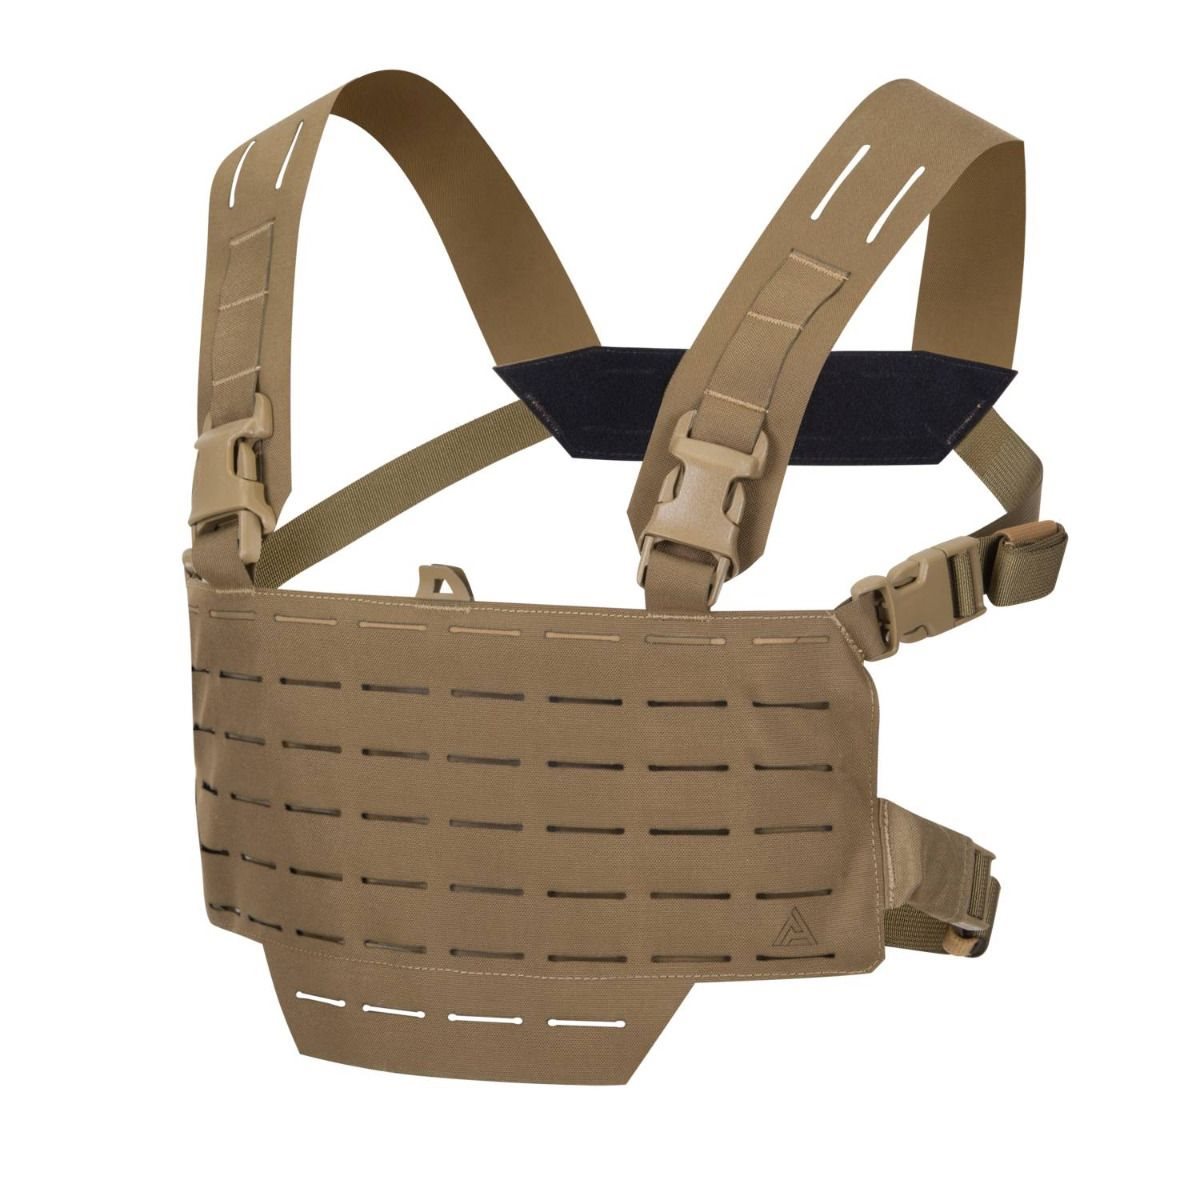 DIRECT ACTION WARWICK MINI CHEST RIG COYOTE | Army surplus MILITARY RANGE